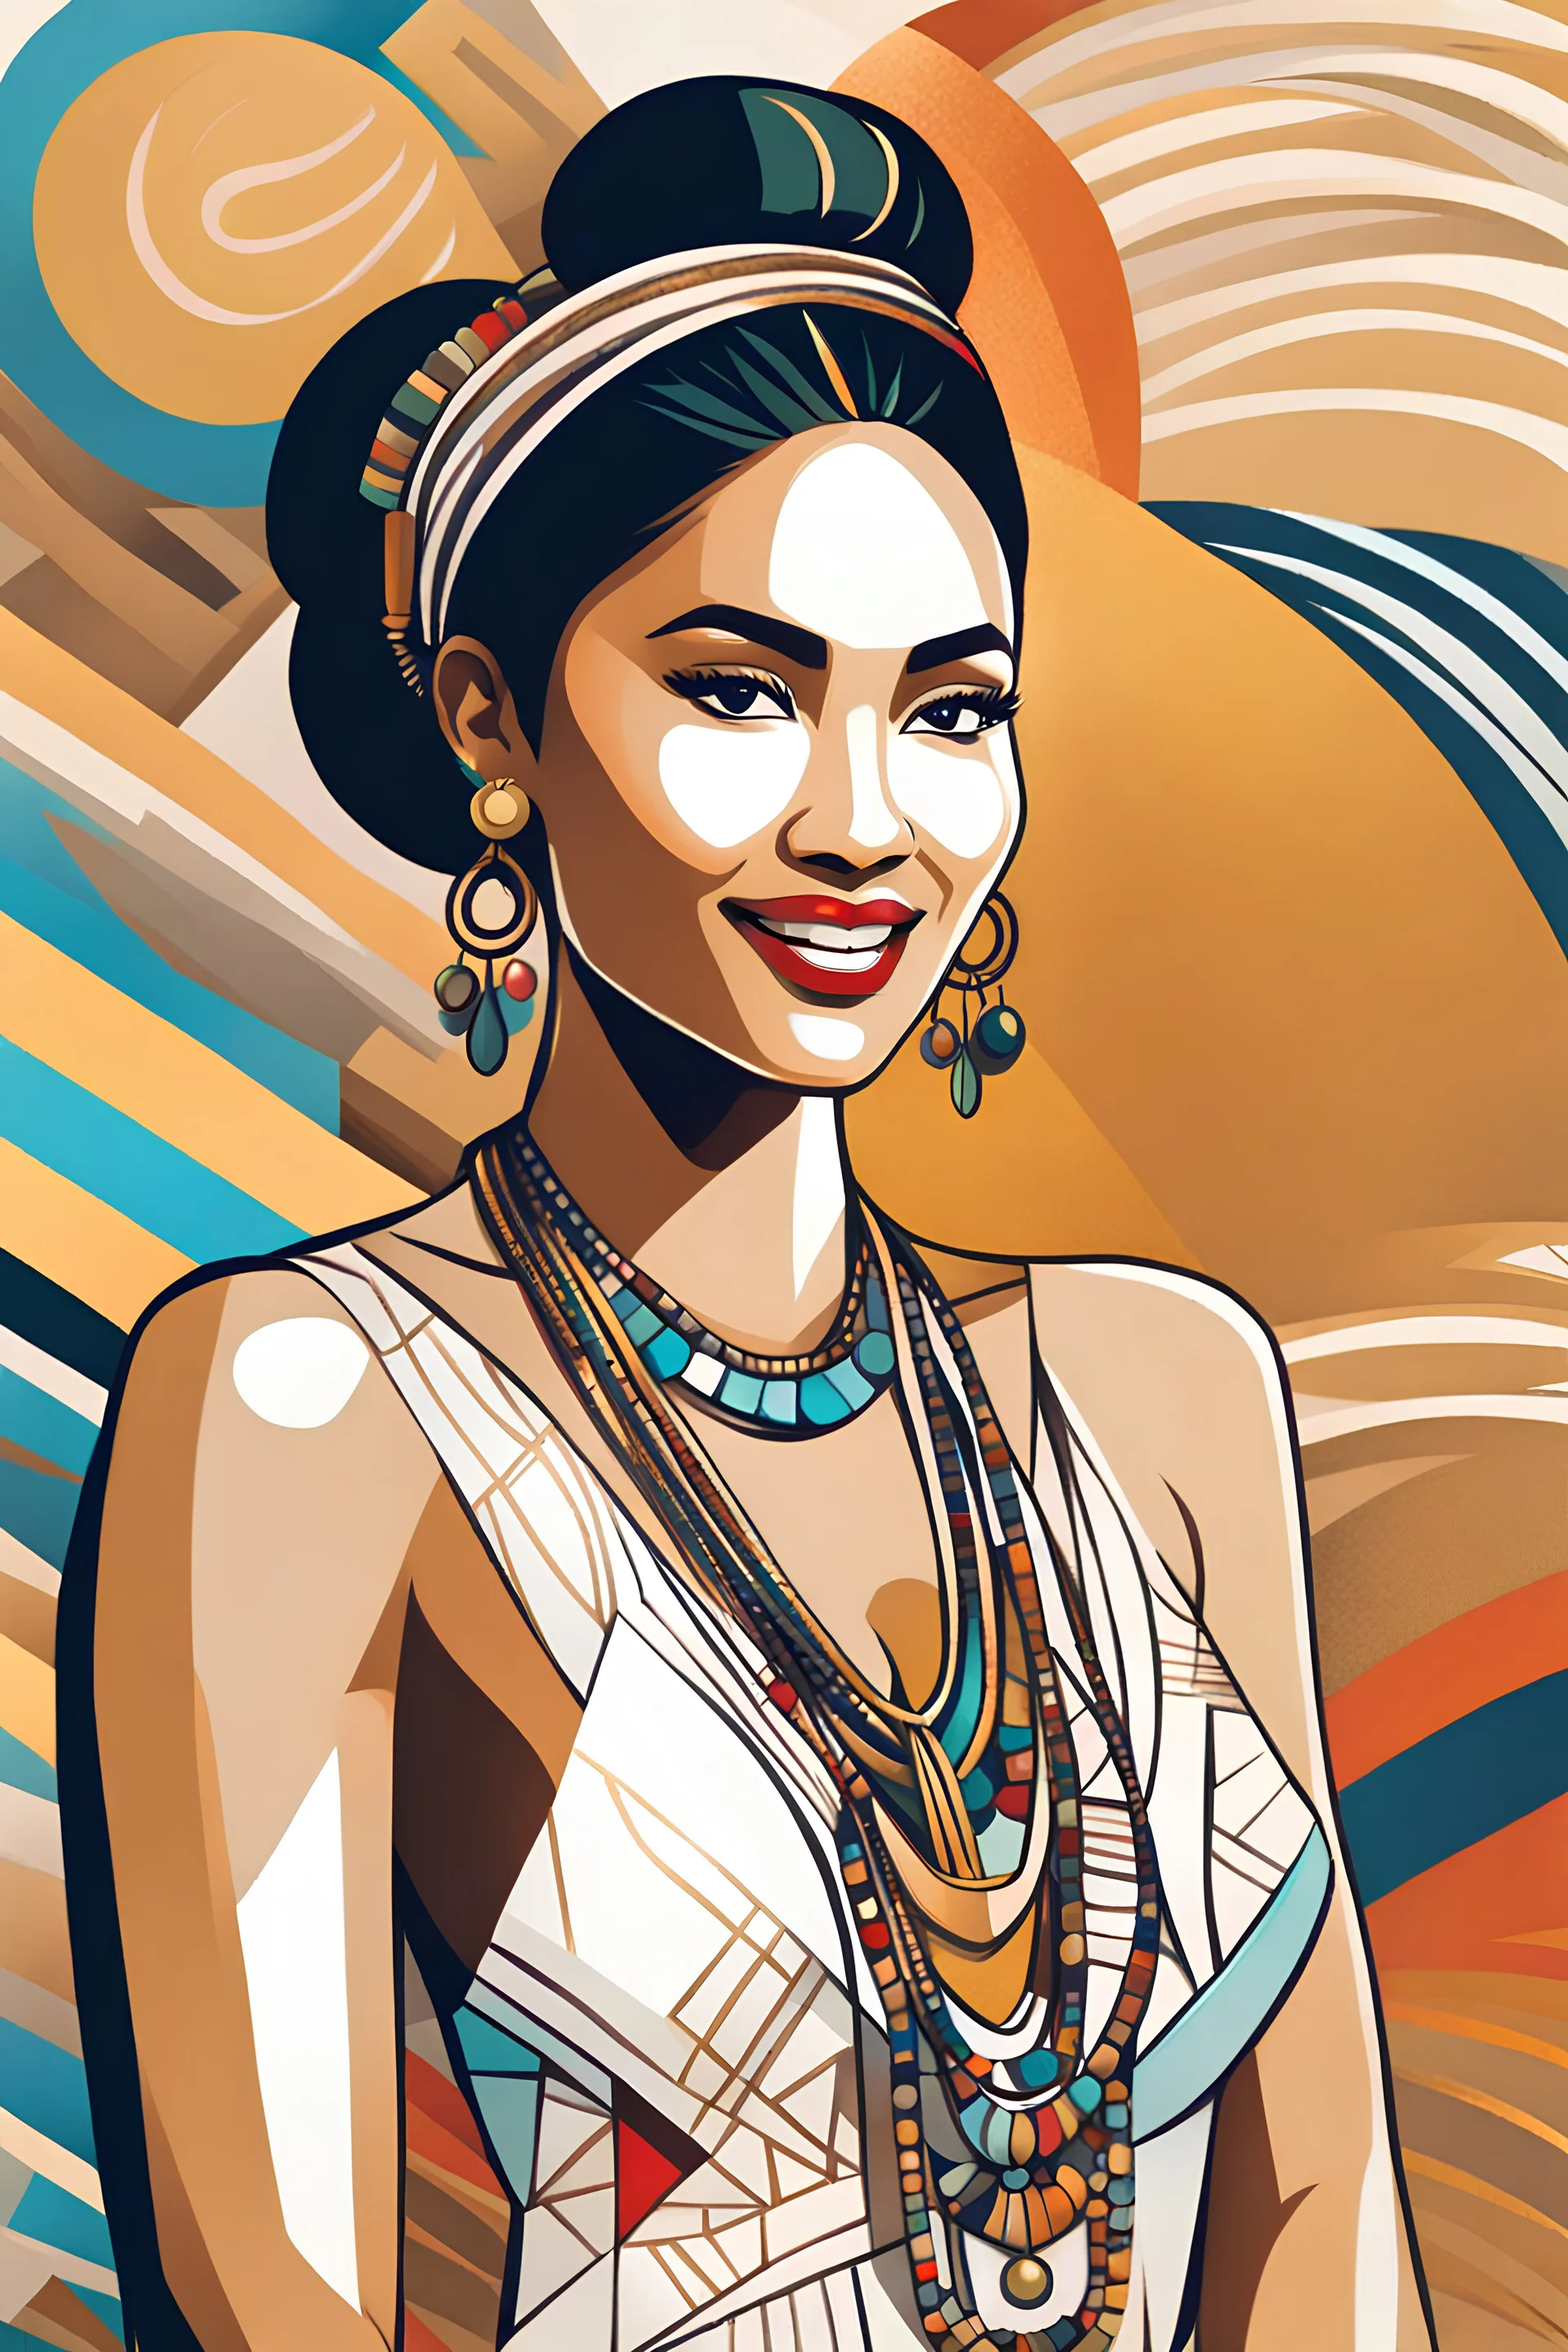 Full color hand drawn sketch, cubism style, grainy, use shadows and shading, visible pencil strokes, an Indonesian woman with striking eyes, white tribal dress, low cut top, native necklaces, visible skin texture, slim and pale tanned-skinned native Indonesian woman, hair in a bun, Bokeh background, golden ratio. Supermodel beautiful and smiling, facing the camera